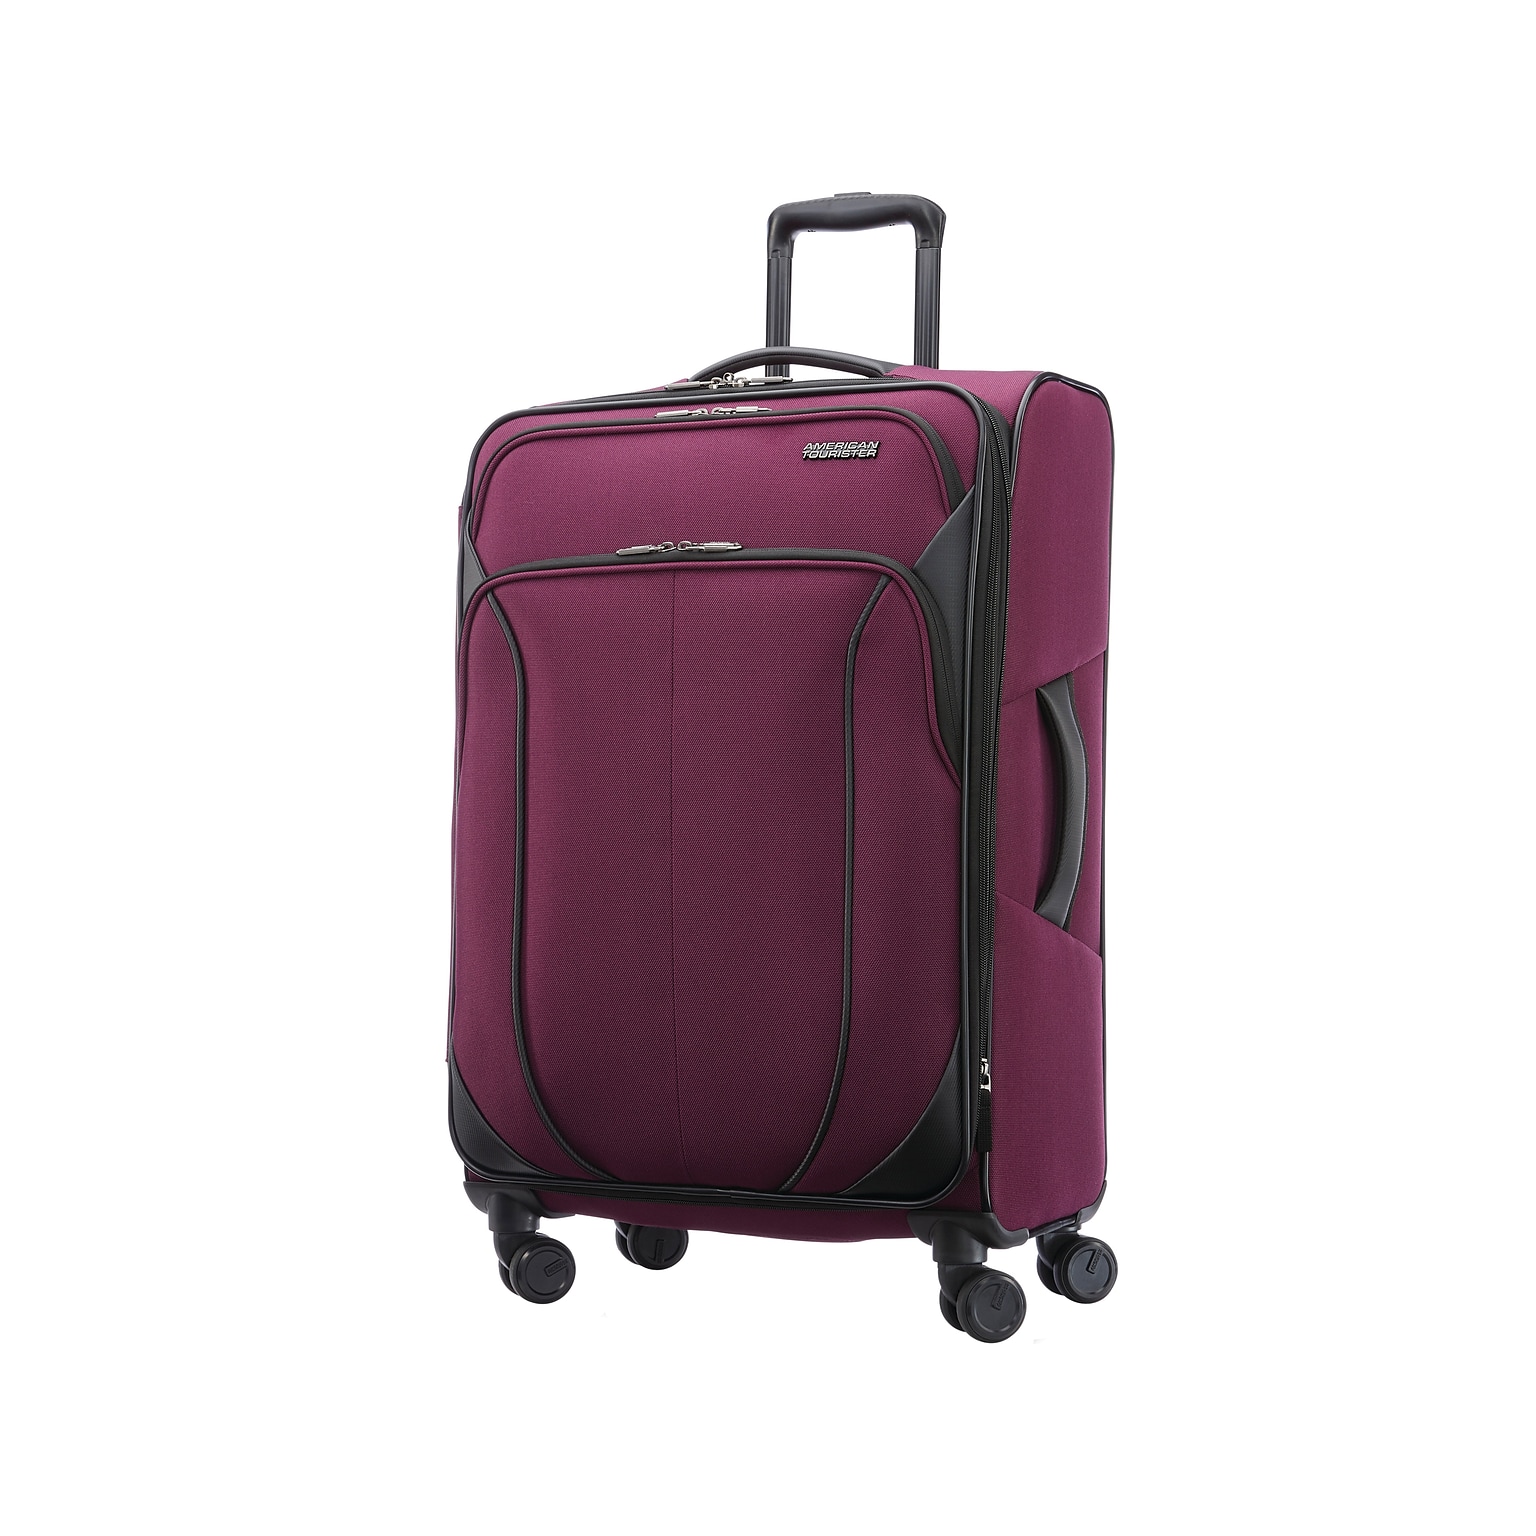 American Tourister 4 Kix 2.0 27.75 Suitcase, 4-Wheeled Spinner, Purple Orchid (142353-2011)